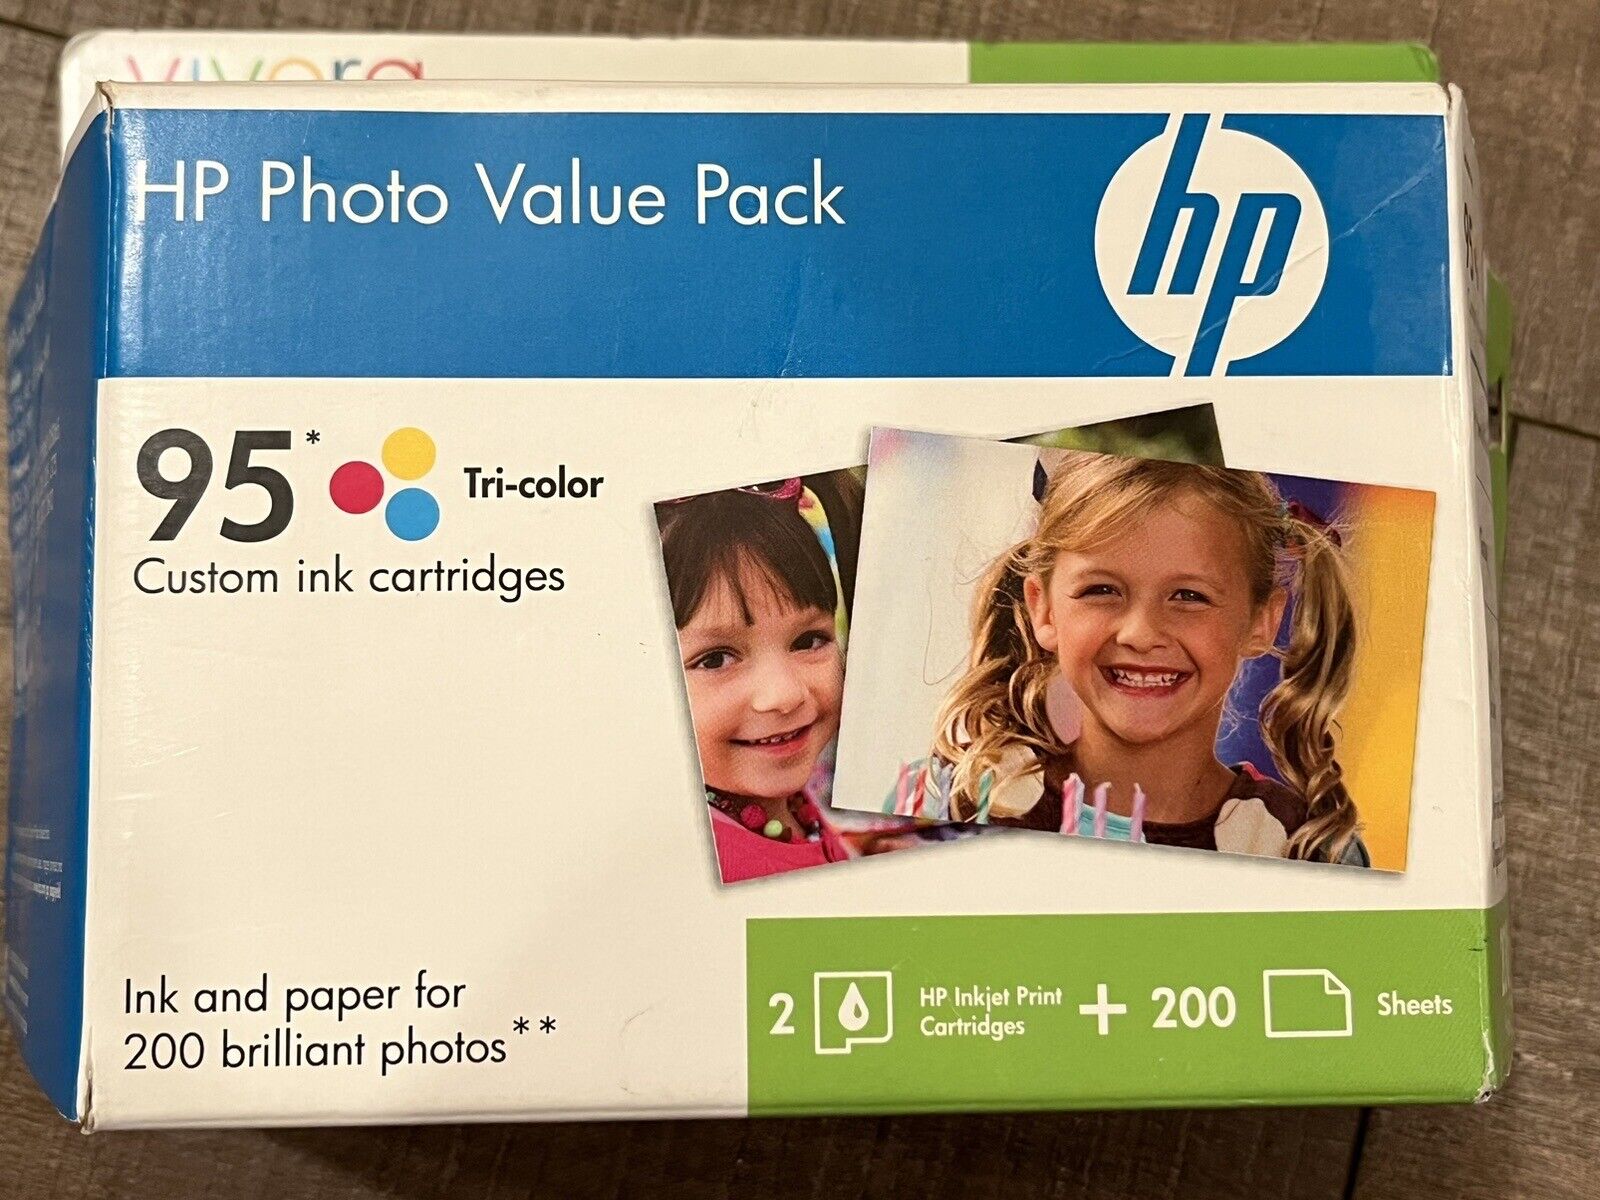 HP Photo Value Pack 95 Tri-Color 1 Ink 200 Photo Sheets - New open box expired